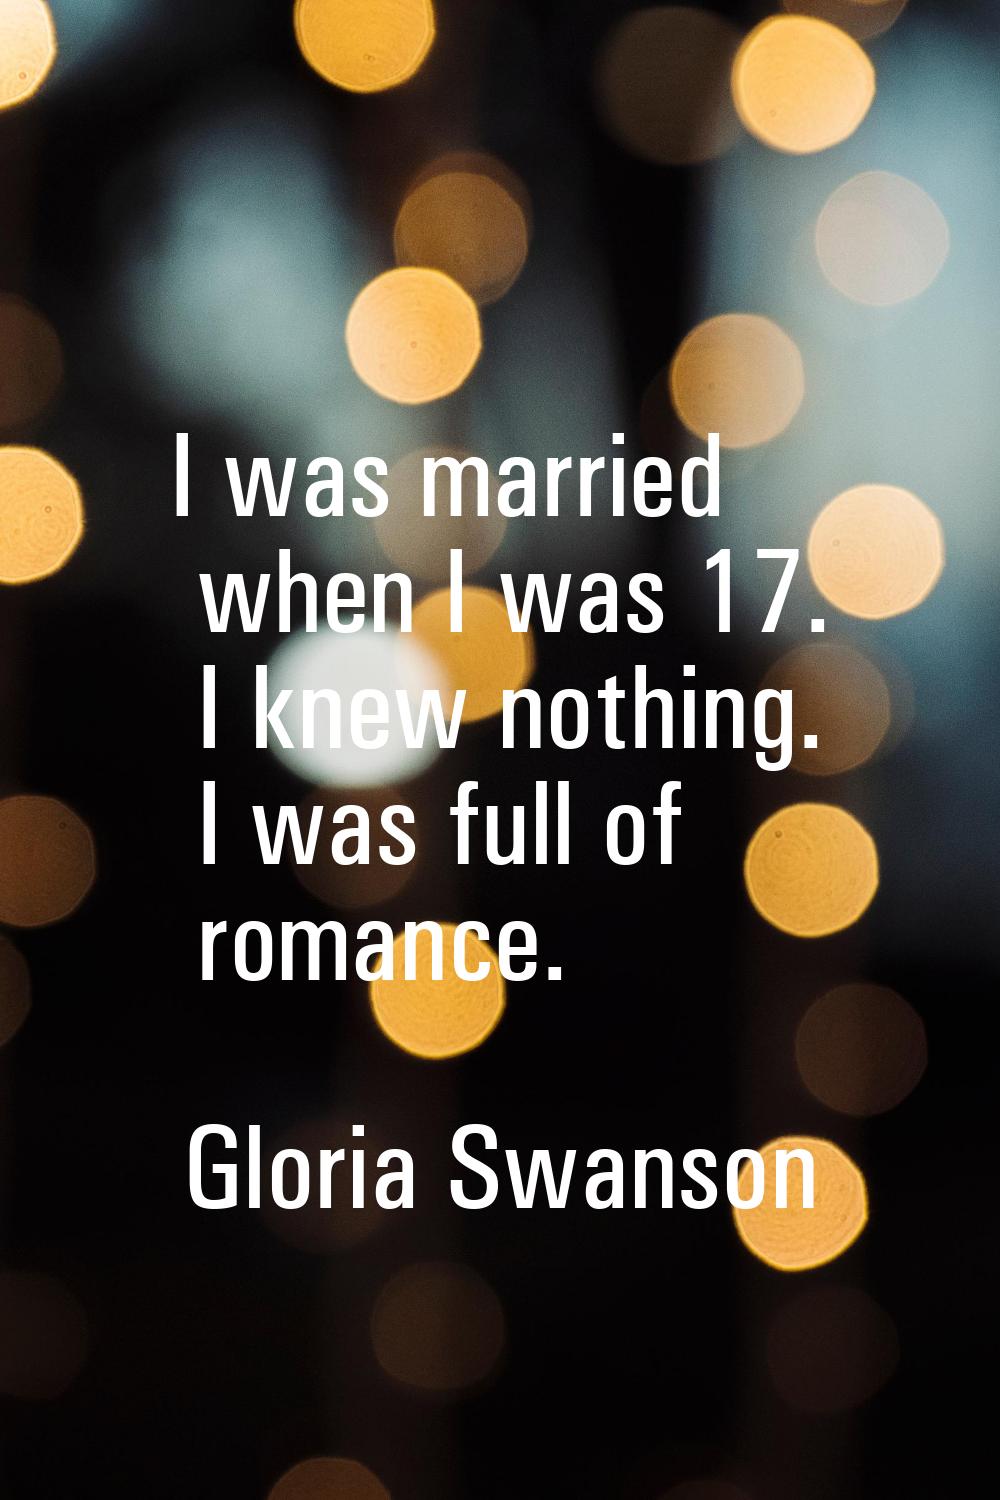 I was married when I was 17. I knew nothing. I was full of romance.